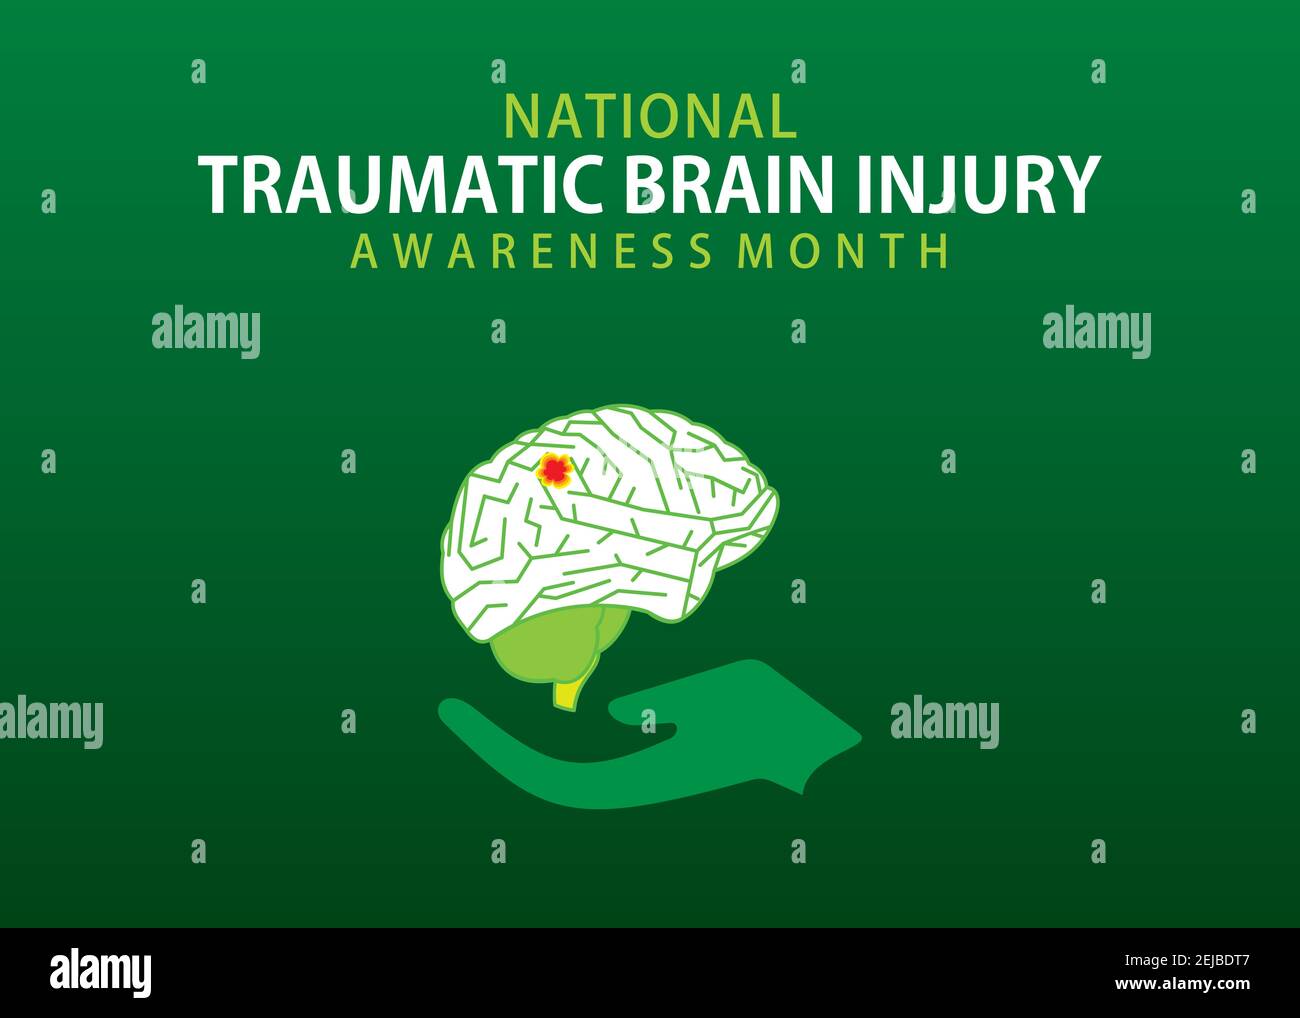 vector illustration of traumatic brain injury awareness month concept design. Stock Vector